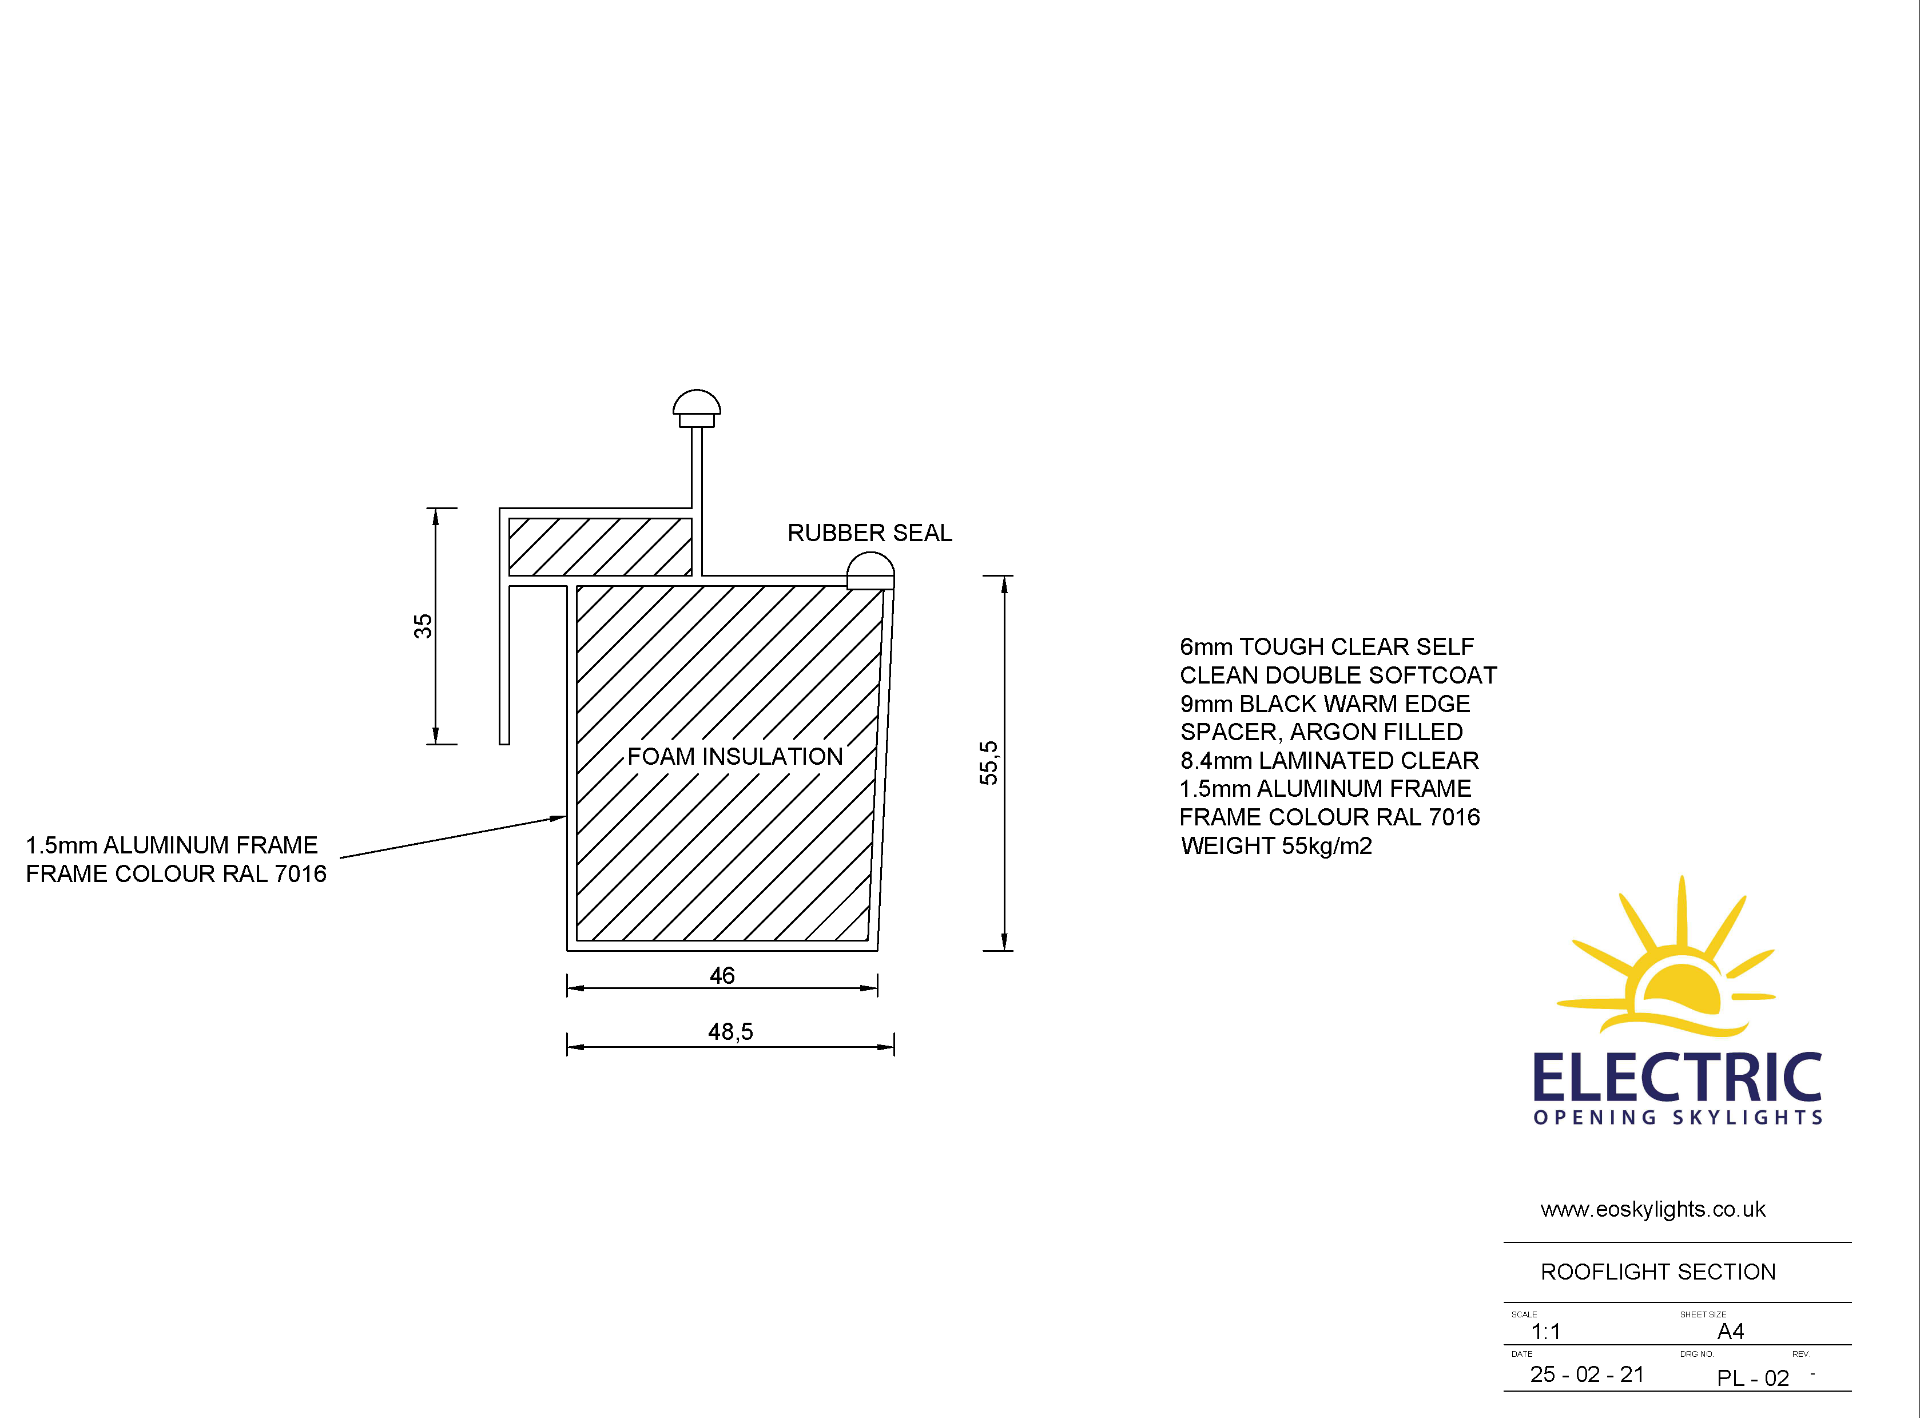 Panoroof (EOS)Electric Opening Skylight 1200x1200mm - Aluminiun Frame Double Glazed Laminated Self- - Image 5 of 6